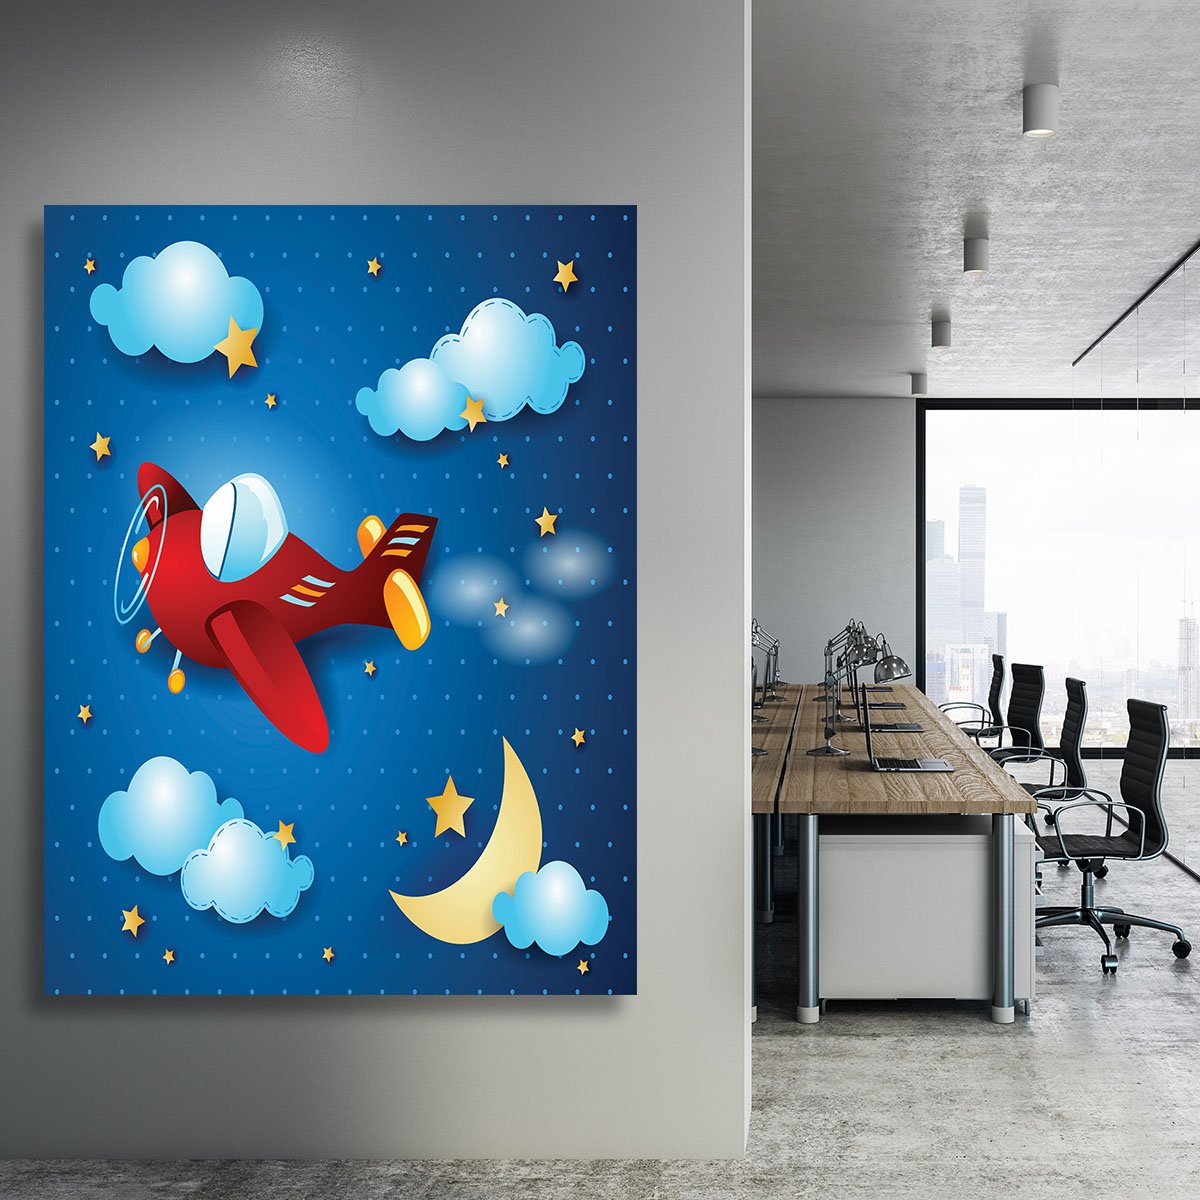 Retro airplane by night Canvas Print or Poster